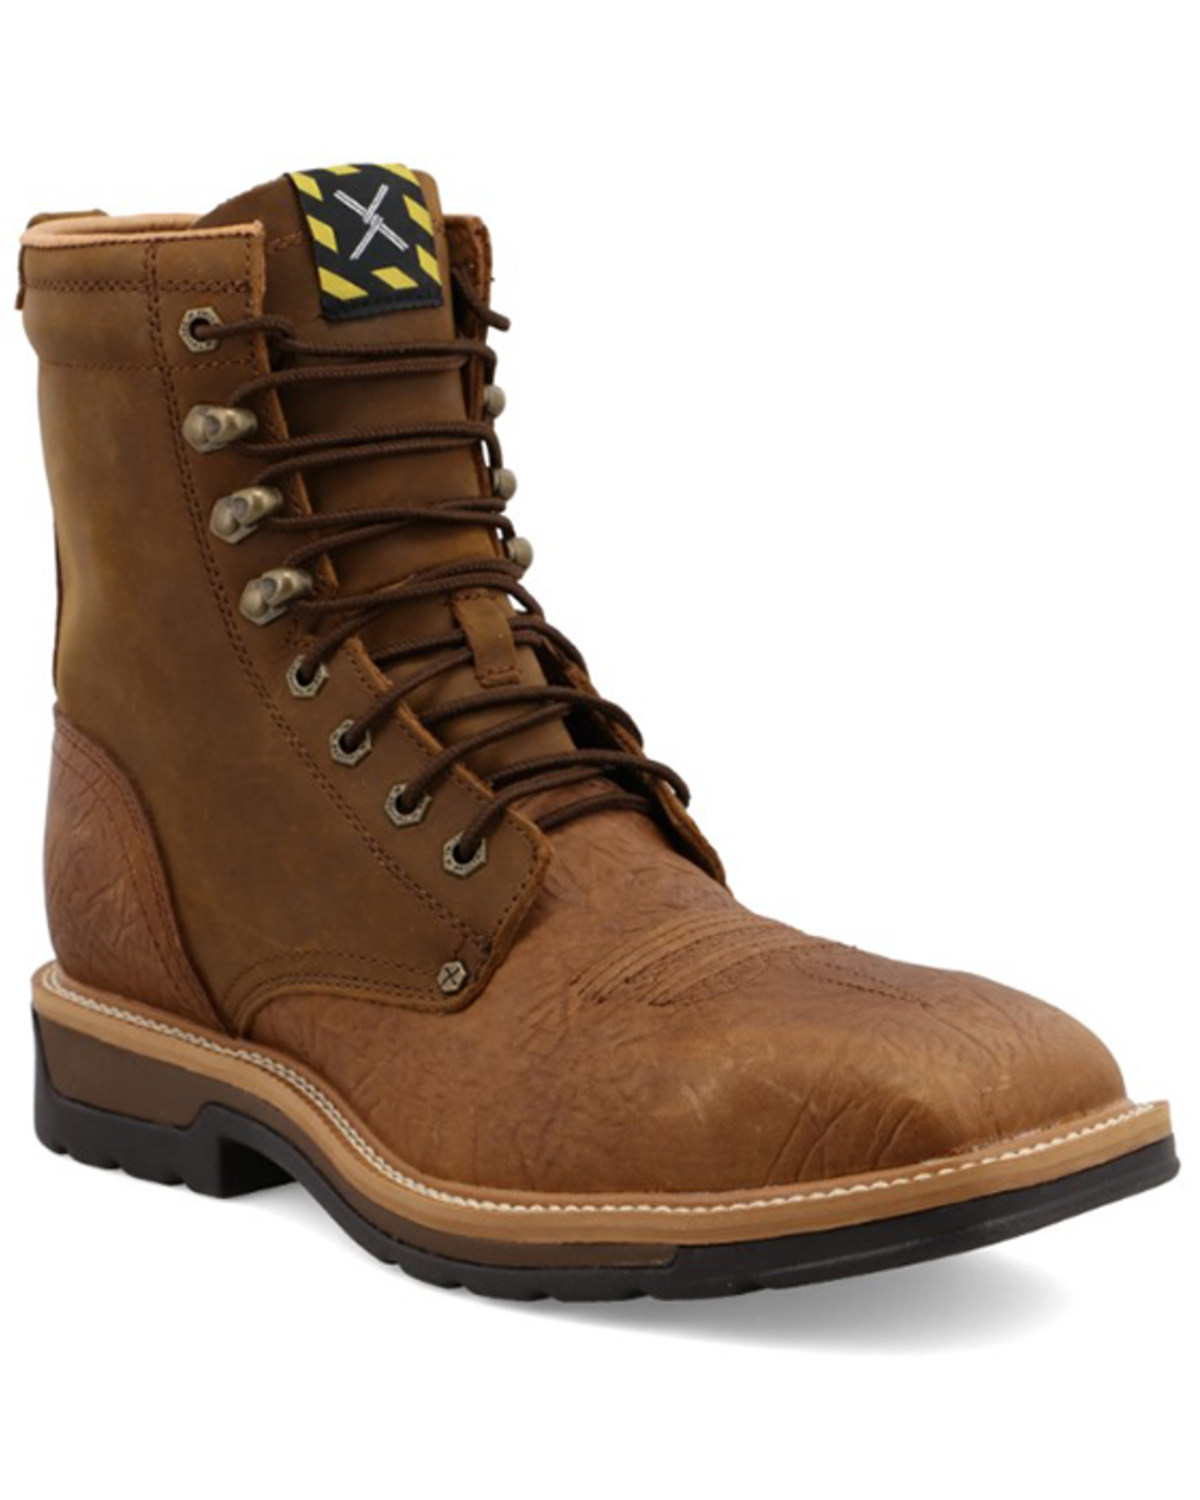 Twisted X Men's Lite 8" Lace-Up Work Boots - Steel Toe